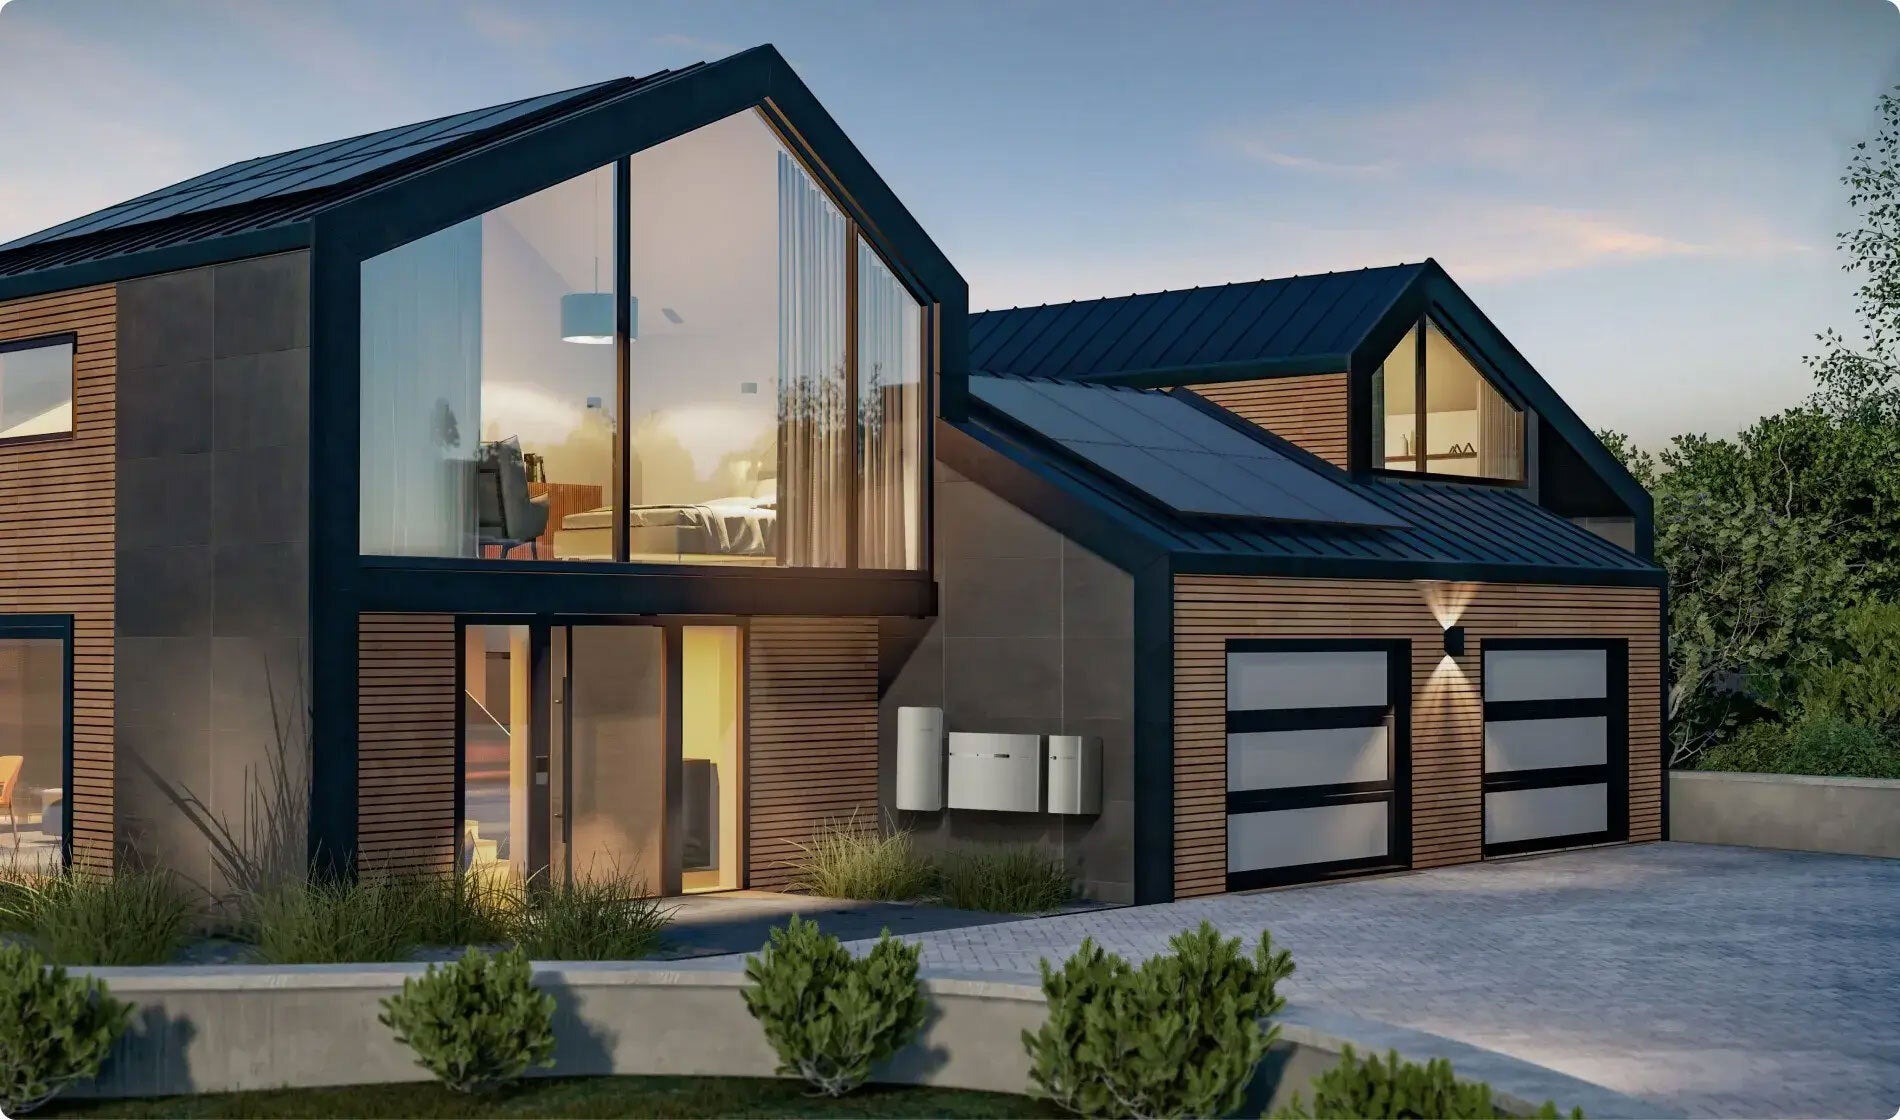 rendering of home with solar panels and enphase battery system on exterior wall